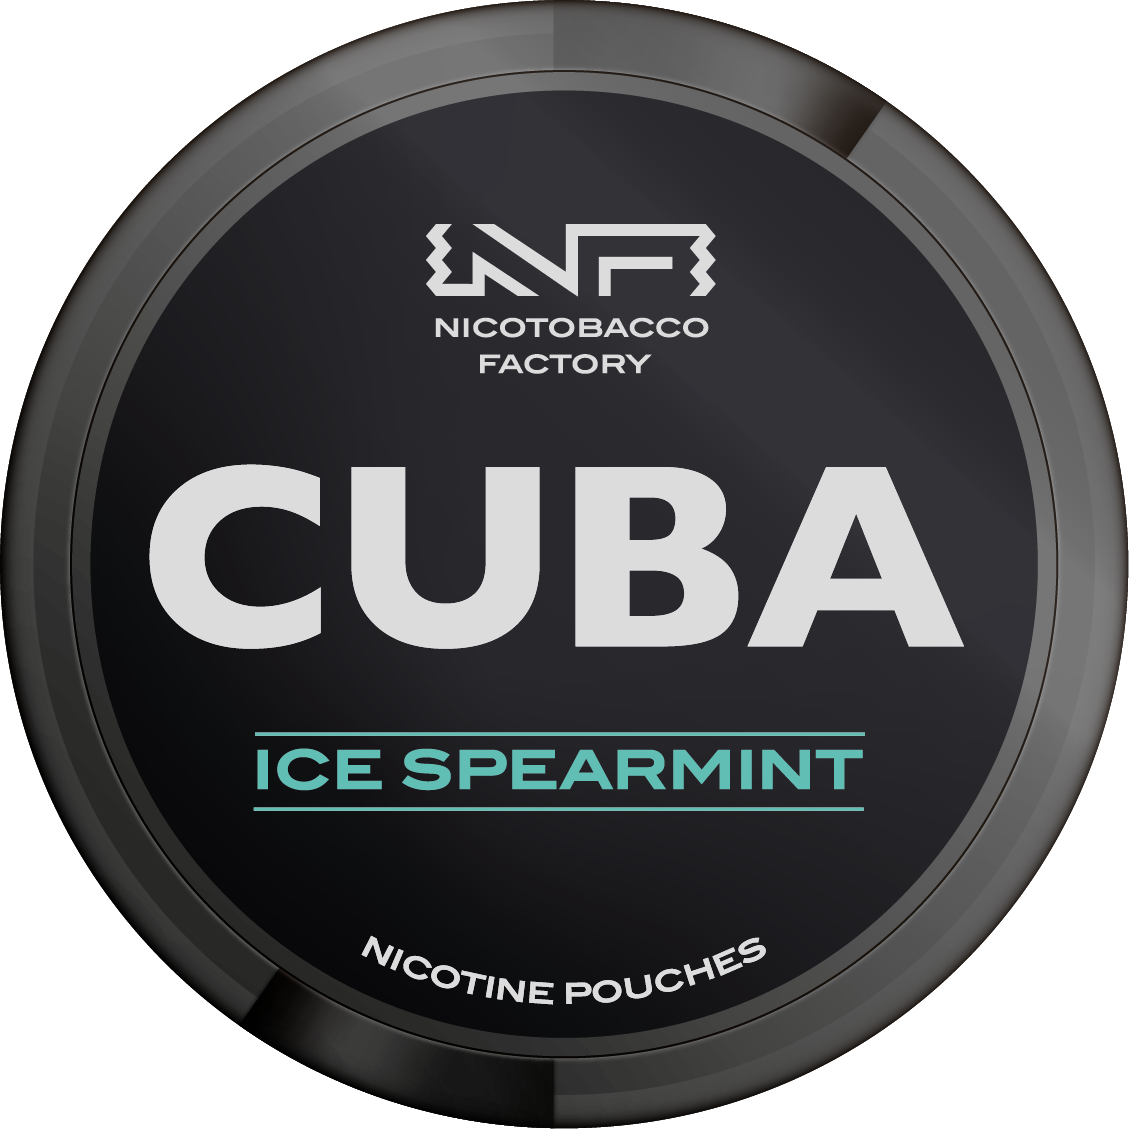 Black Ice Spearmint Nicotine Pouches By Cuba